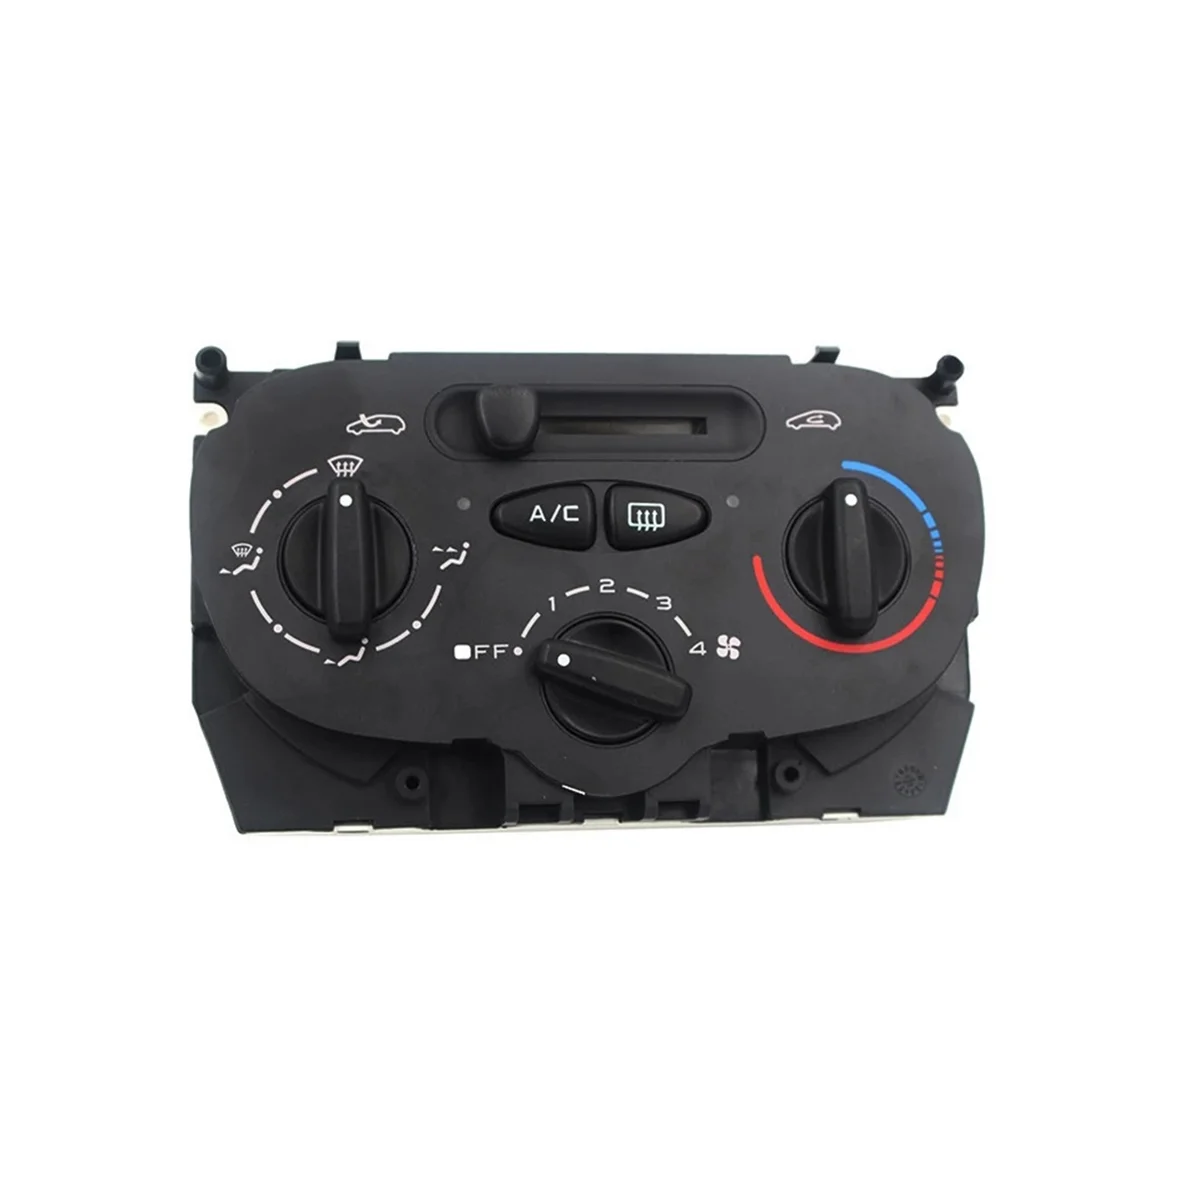 

Air AC Heater Panel Climate Control y Switches for Peugeot 206 207 307 C2 Citroen Pic o 9624675377 X666633H